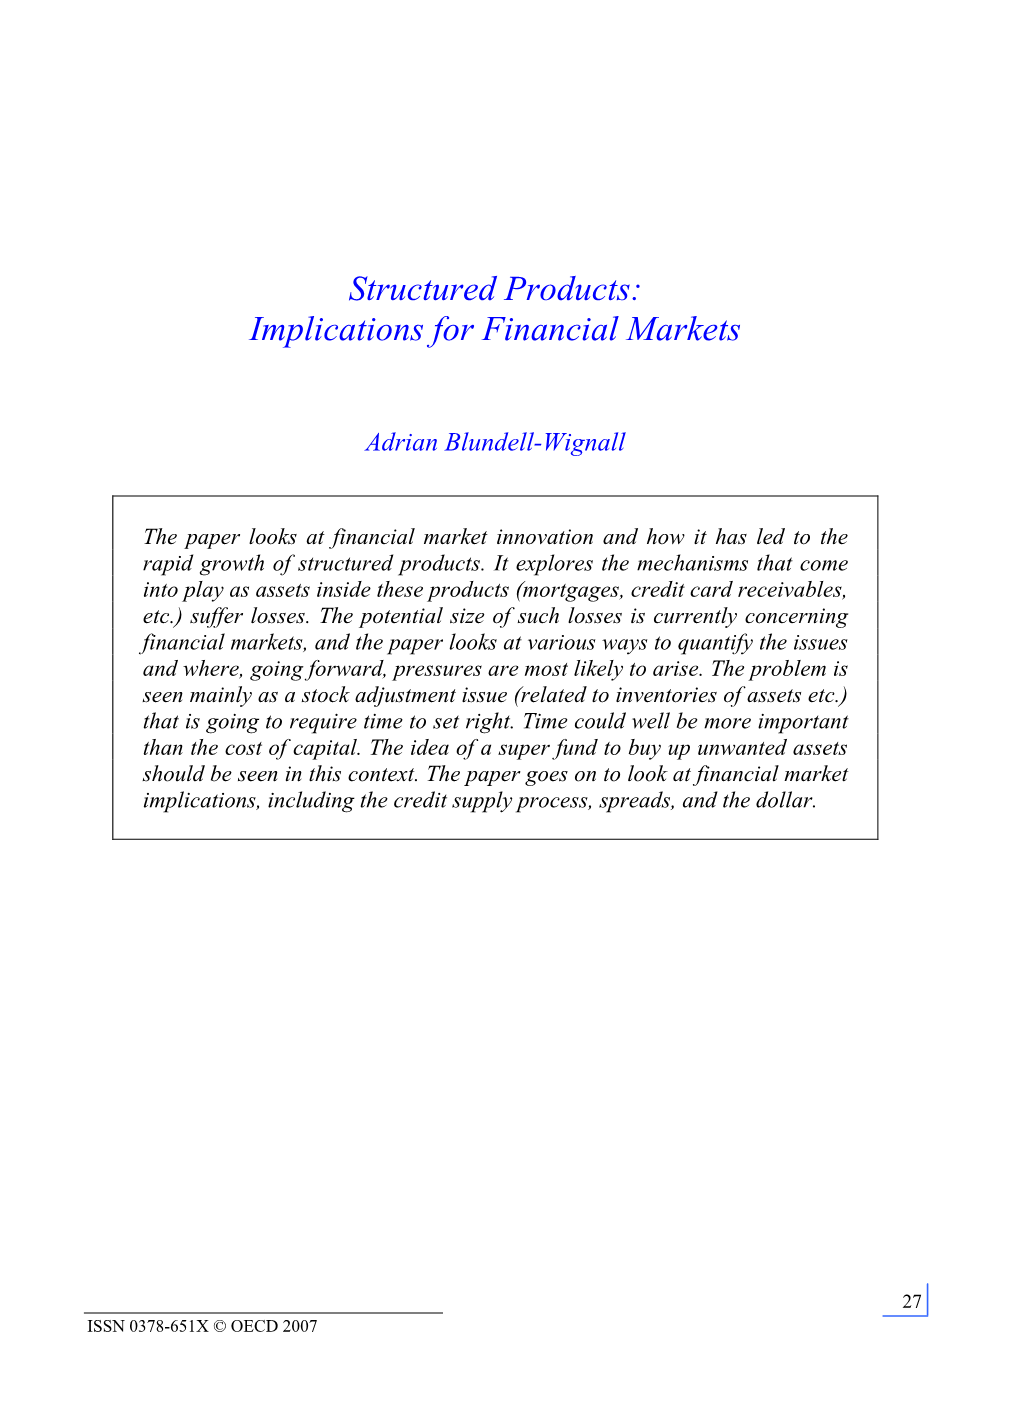 Structured Products: Implications for Financial Markets